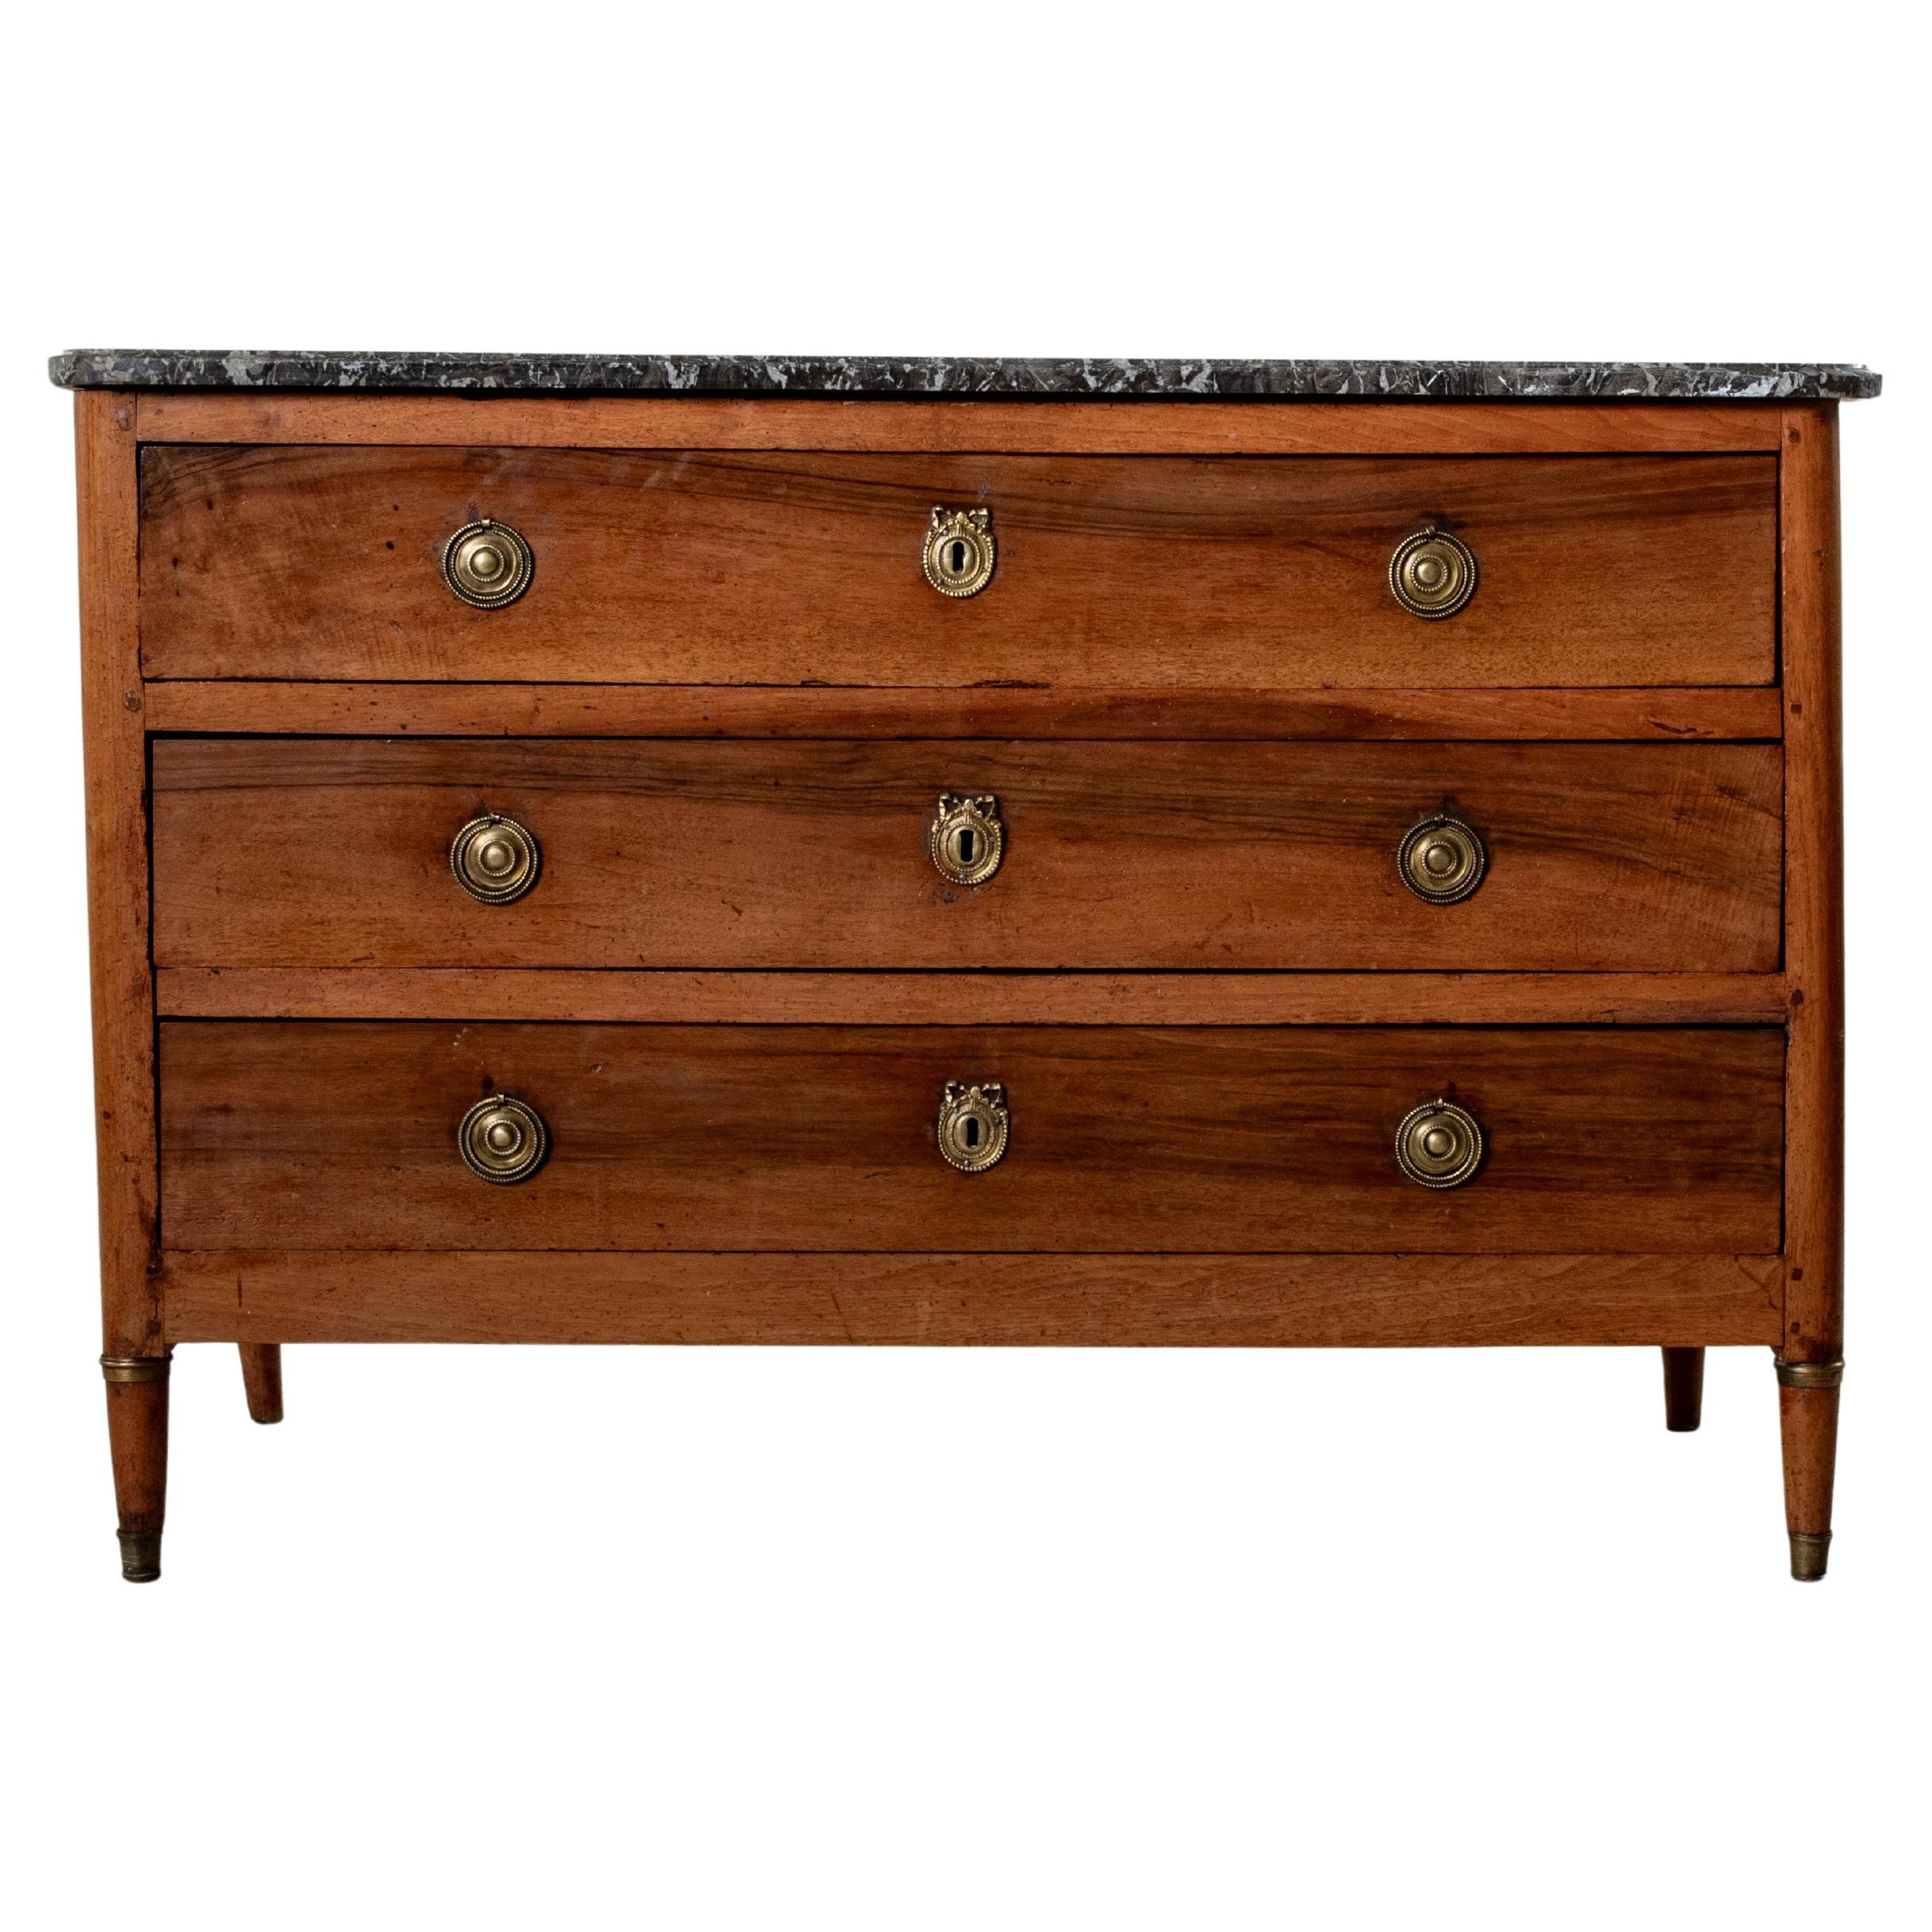 Mid 19th Century French Louis XVI Style Walnut Commode, Chest of Drawers, Marble